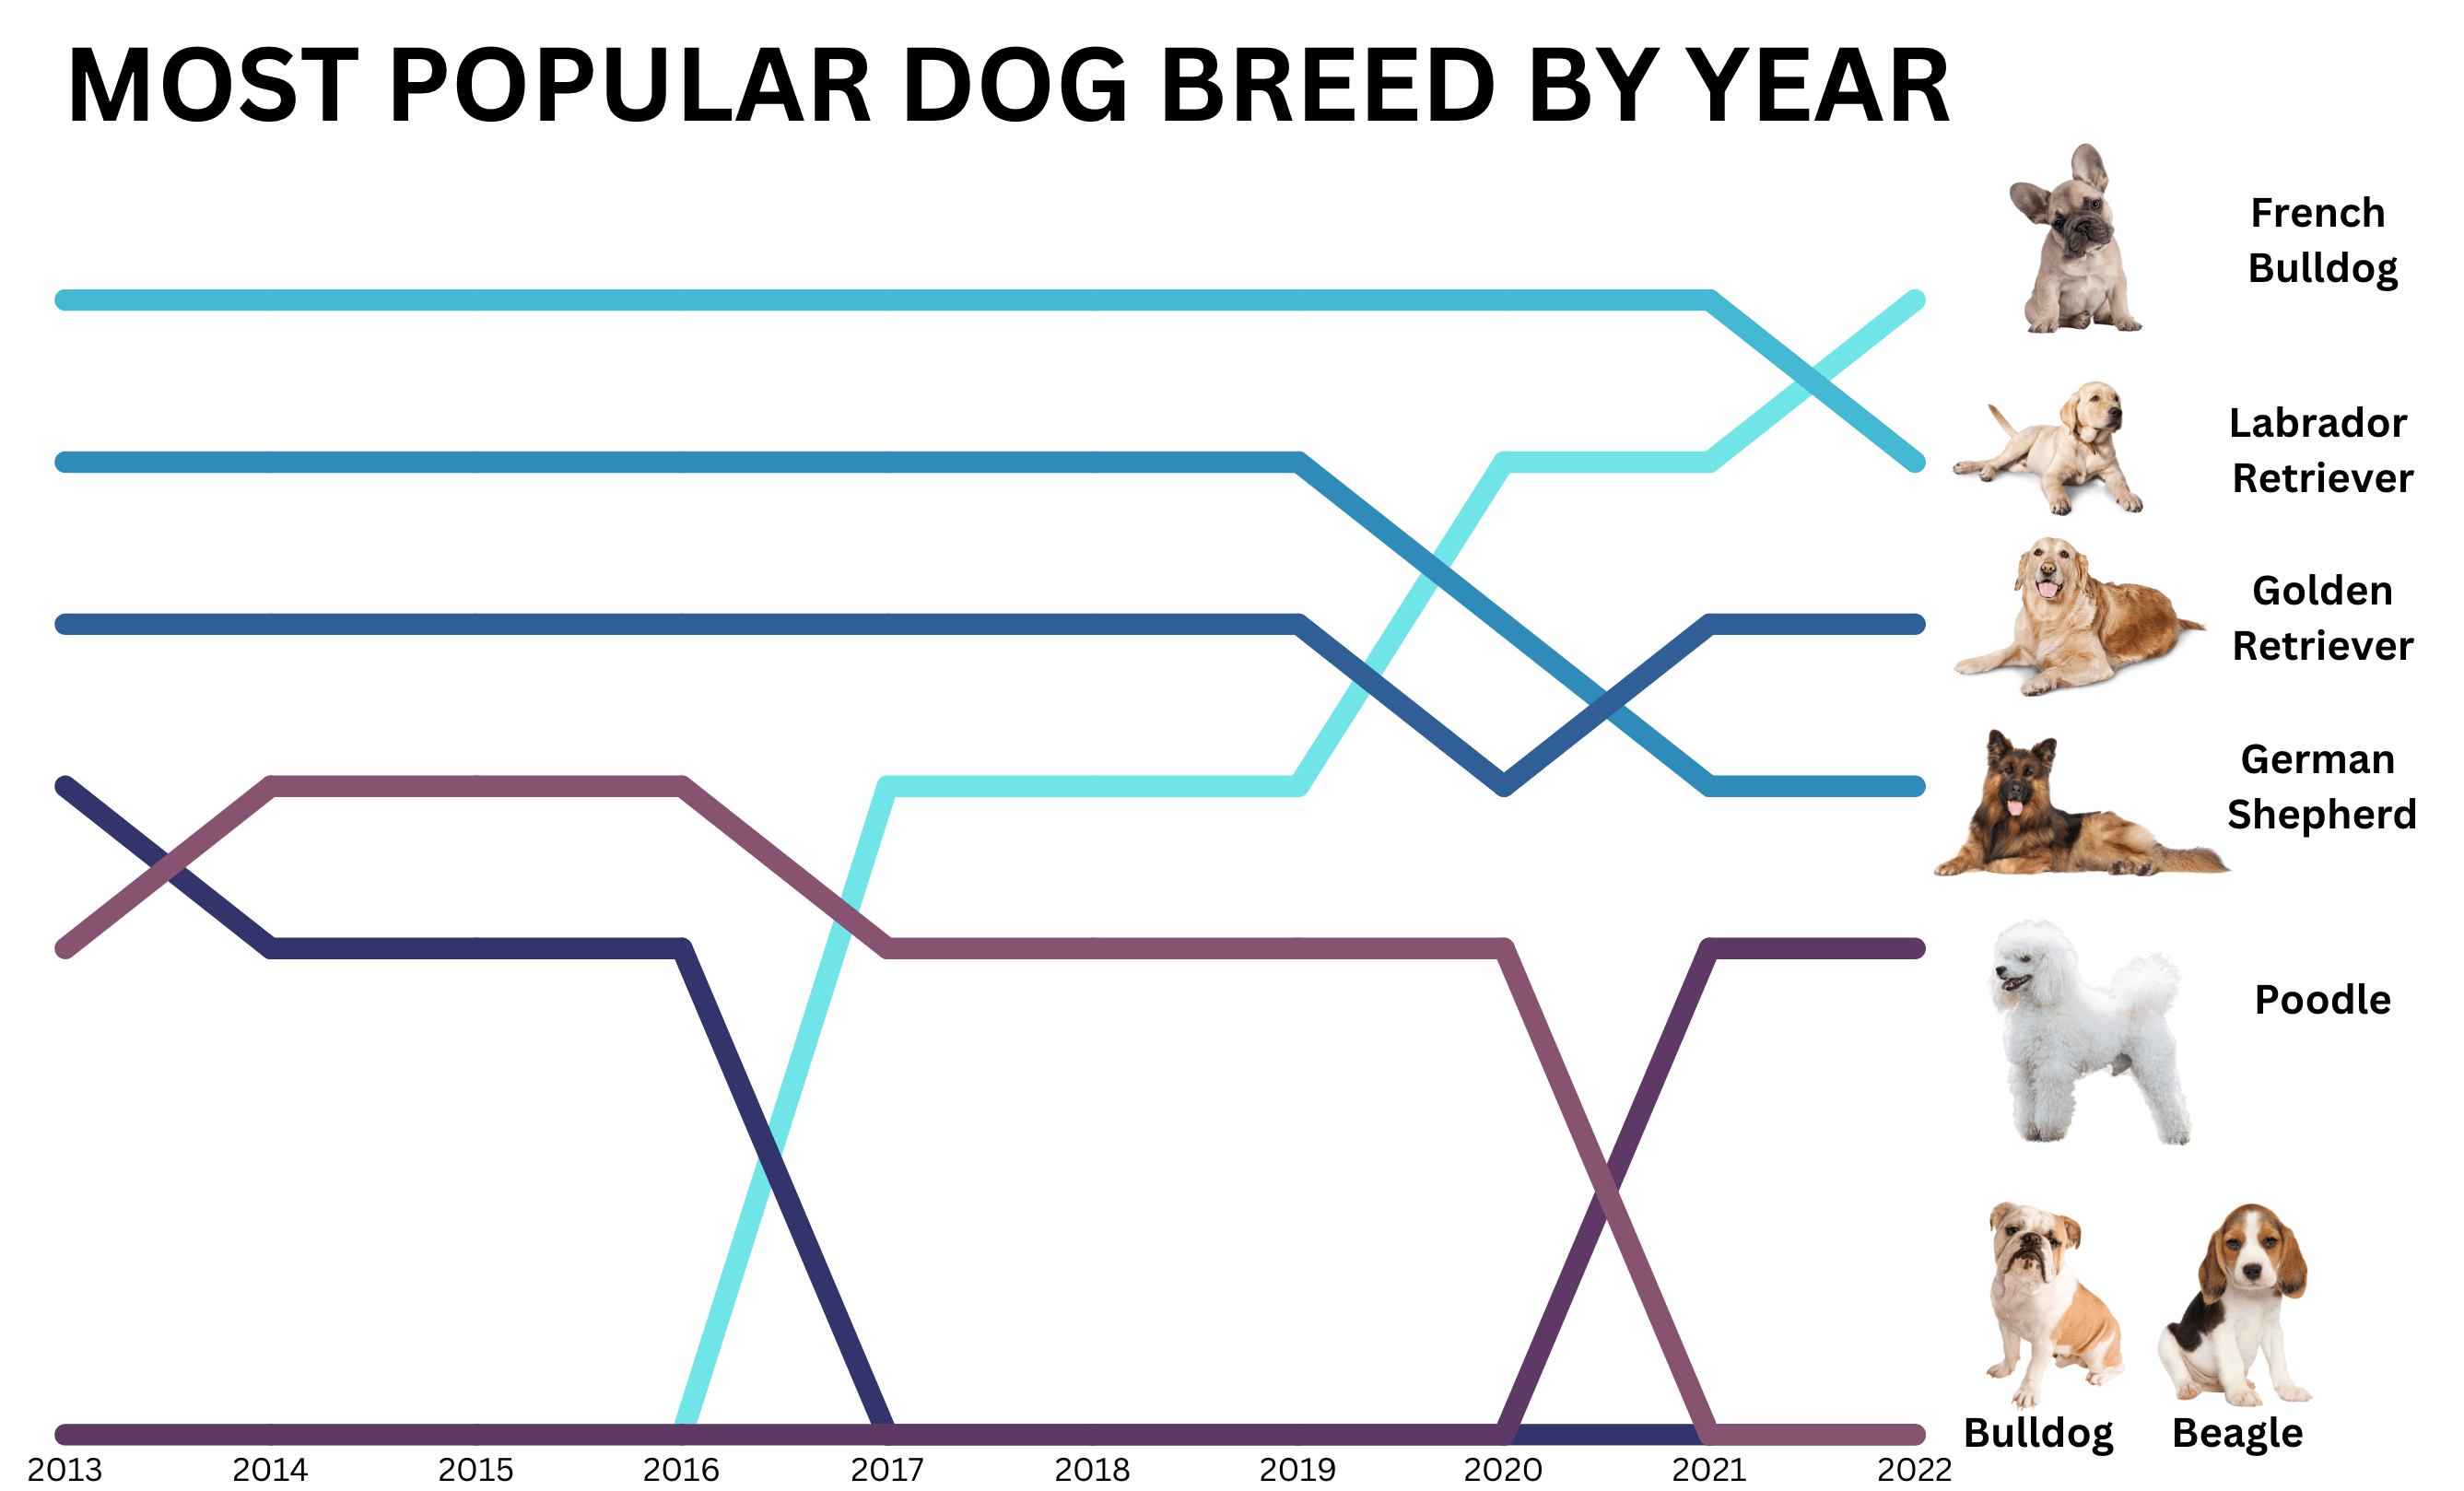 Most popular dog breed by year